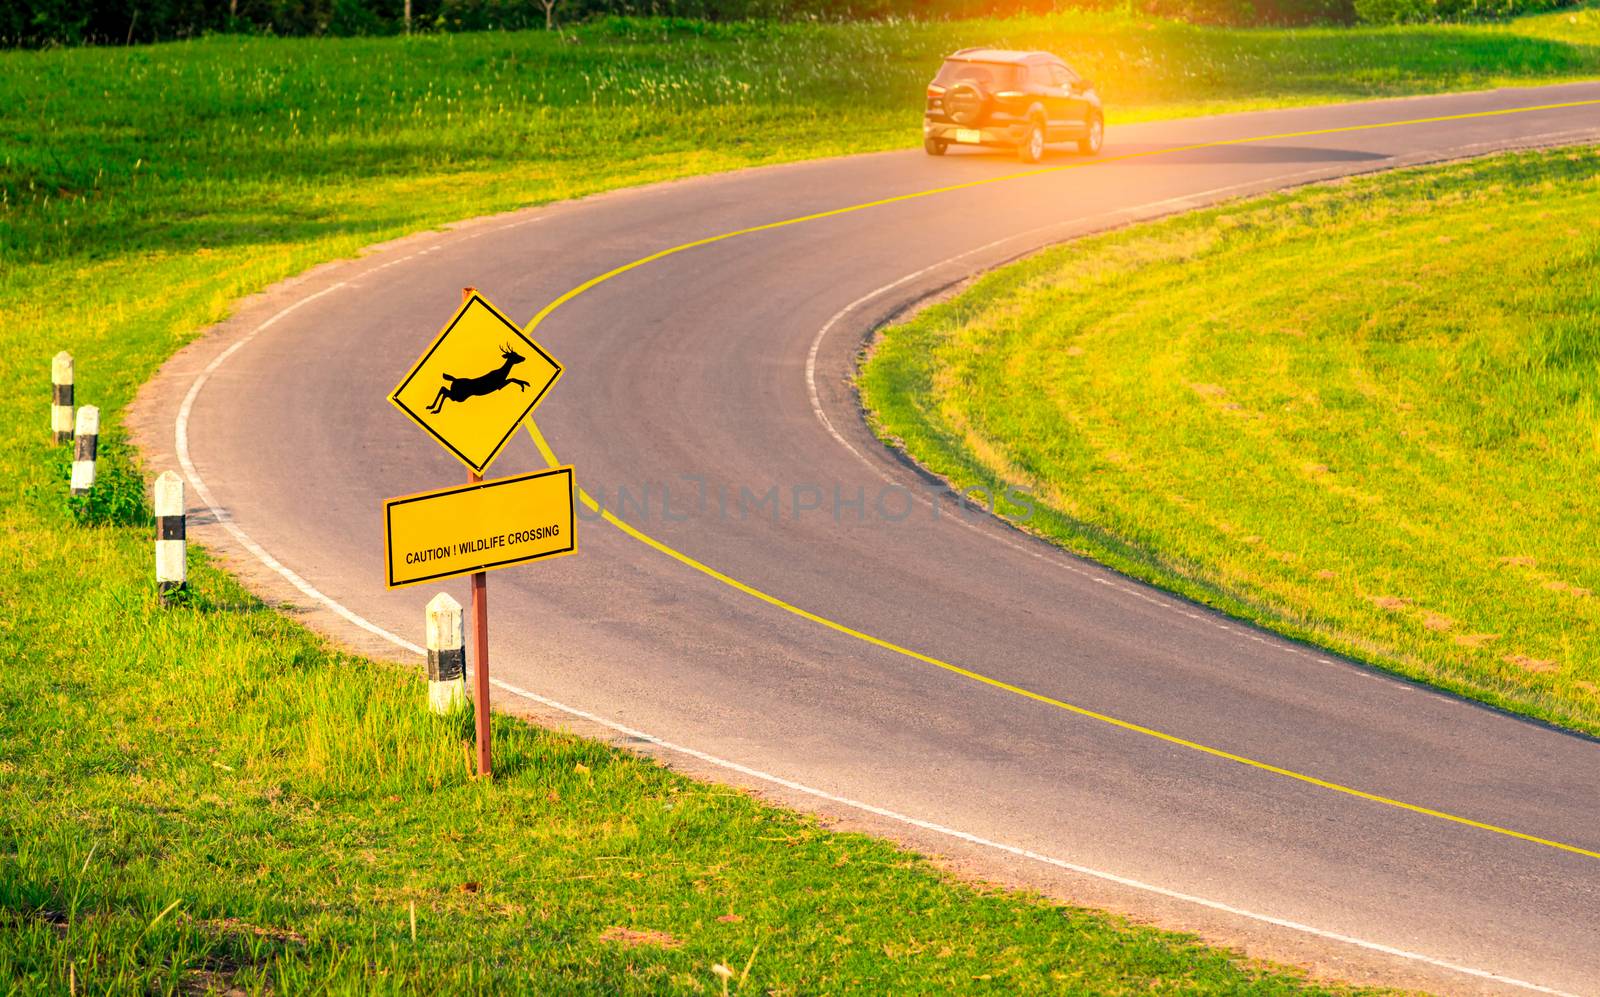 Black SUV car of the tourist driving with caution during travel at curve asphalt road near yellow traffic sign with deer jumping inside the sign and have message "caution wildlife crossing" by Fahroni